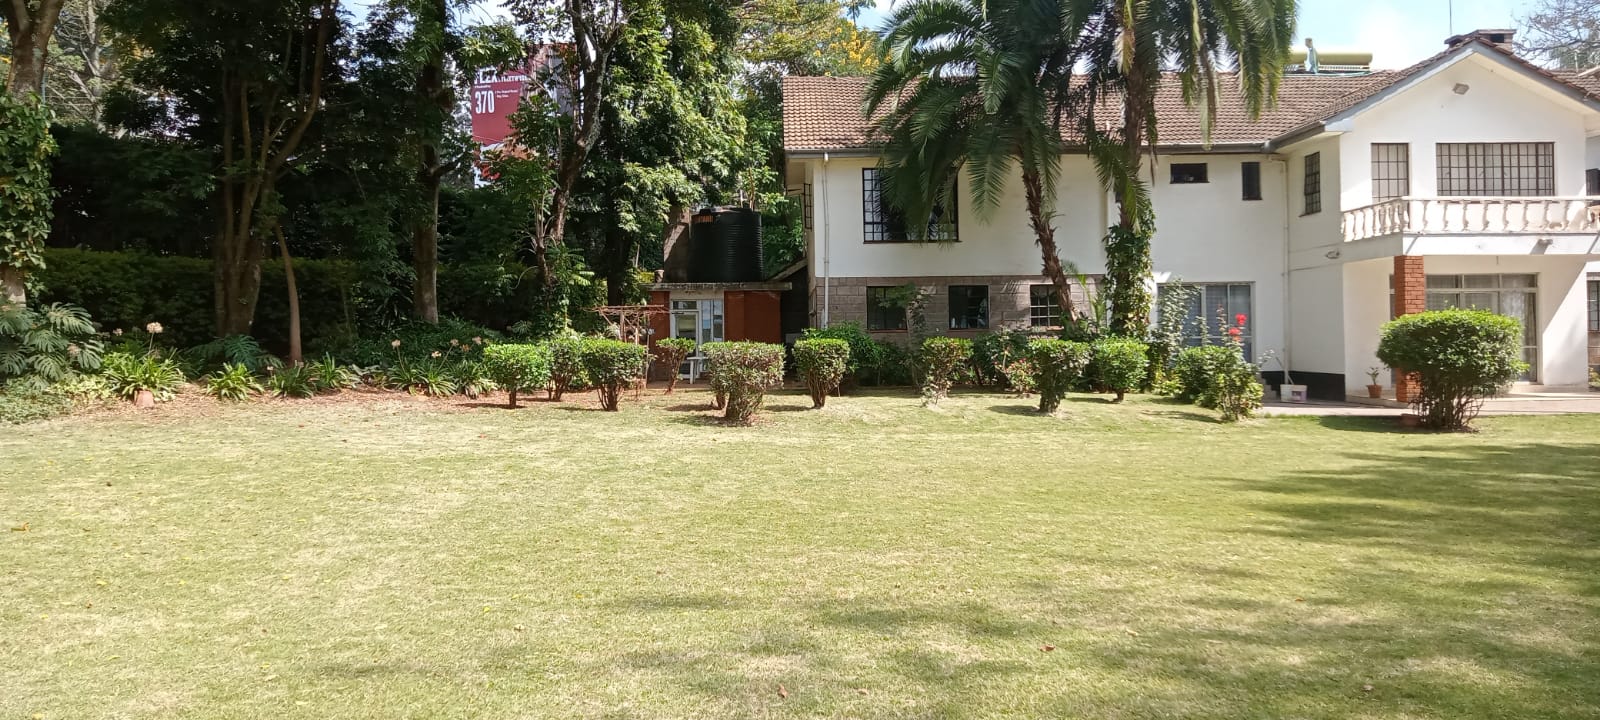 4 Bedroom Double Storey House to Let at Ksh600k Sitting on 34acres with Huge Family Room, Tv Room, Study Room, Terrace, Mature and Well-Kept Garden and more amenities (1)